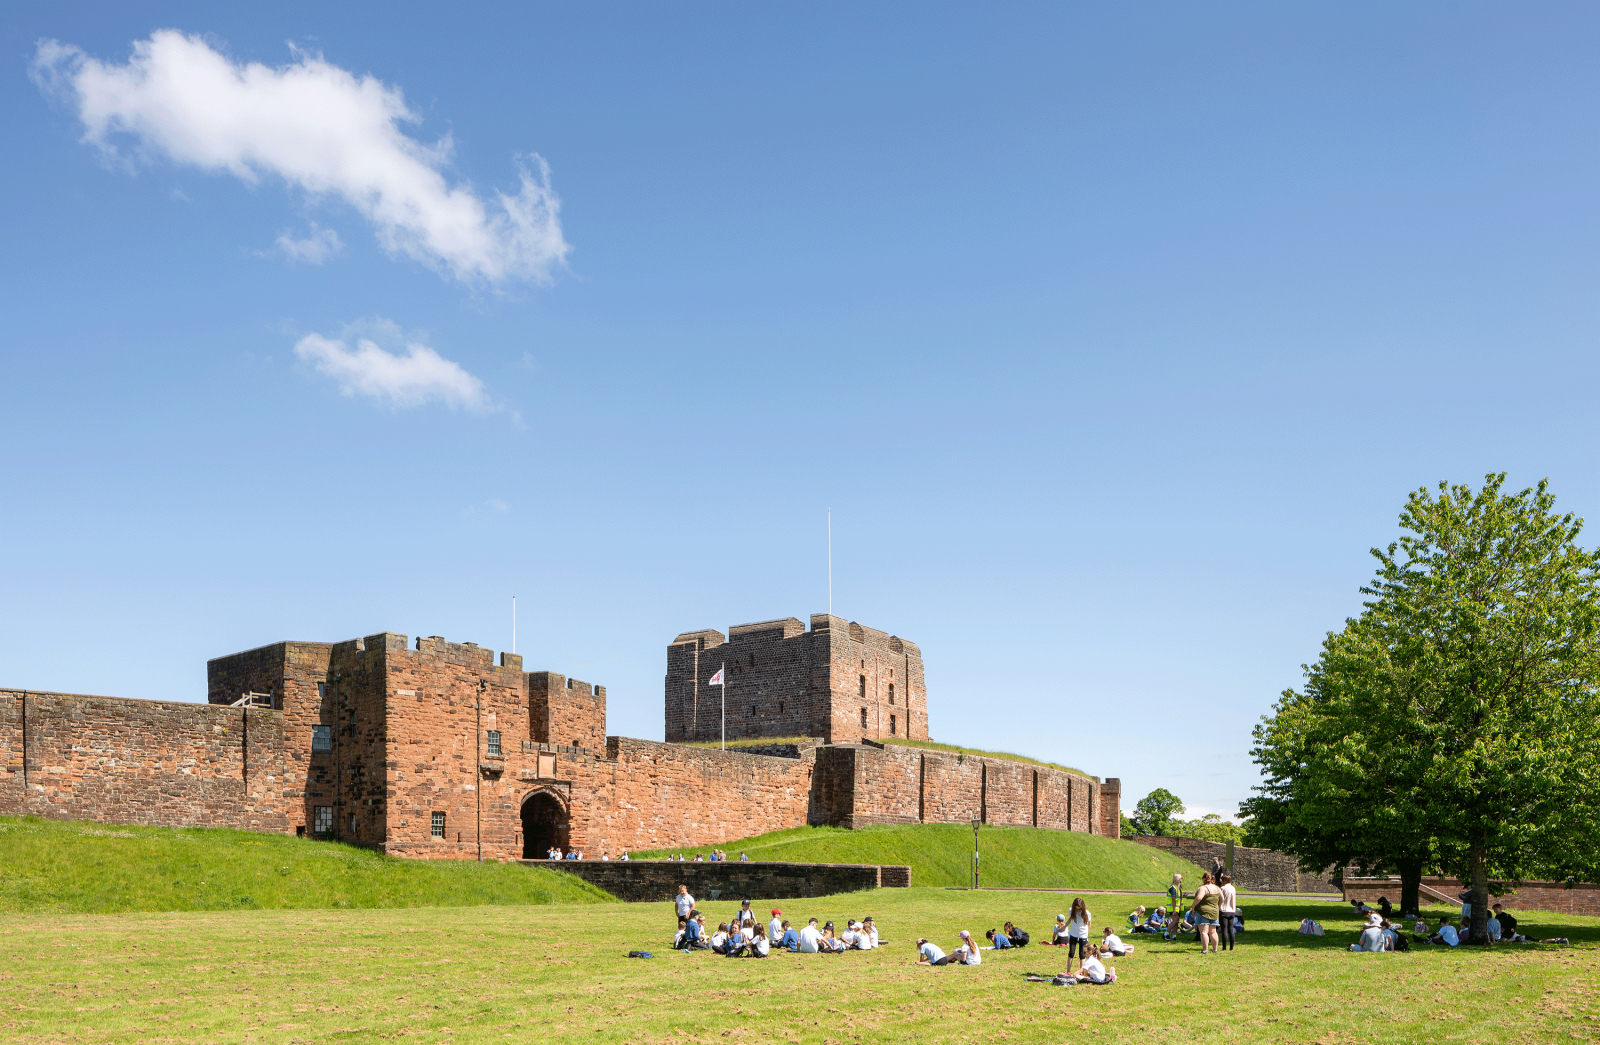 A group of schoolchildren sit on the grass in front of Carlisle Castle on a sunny day